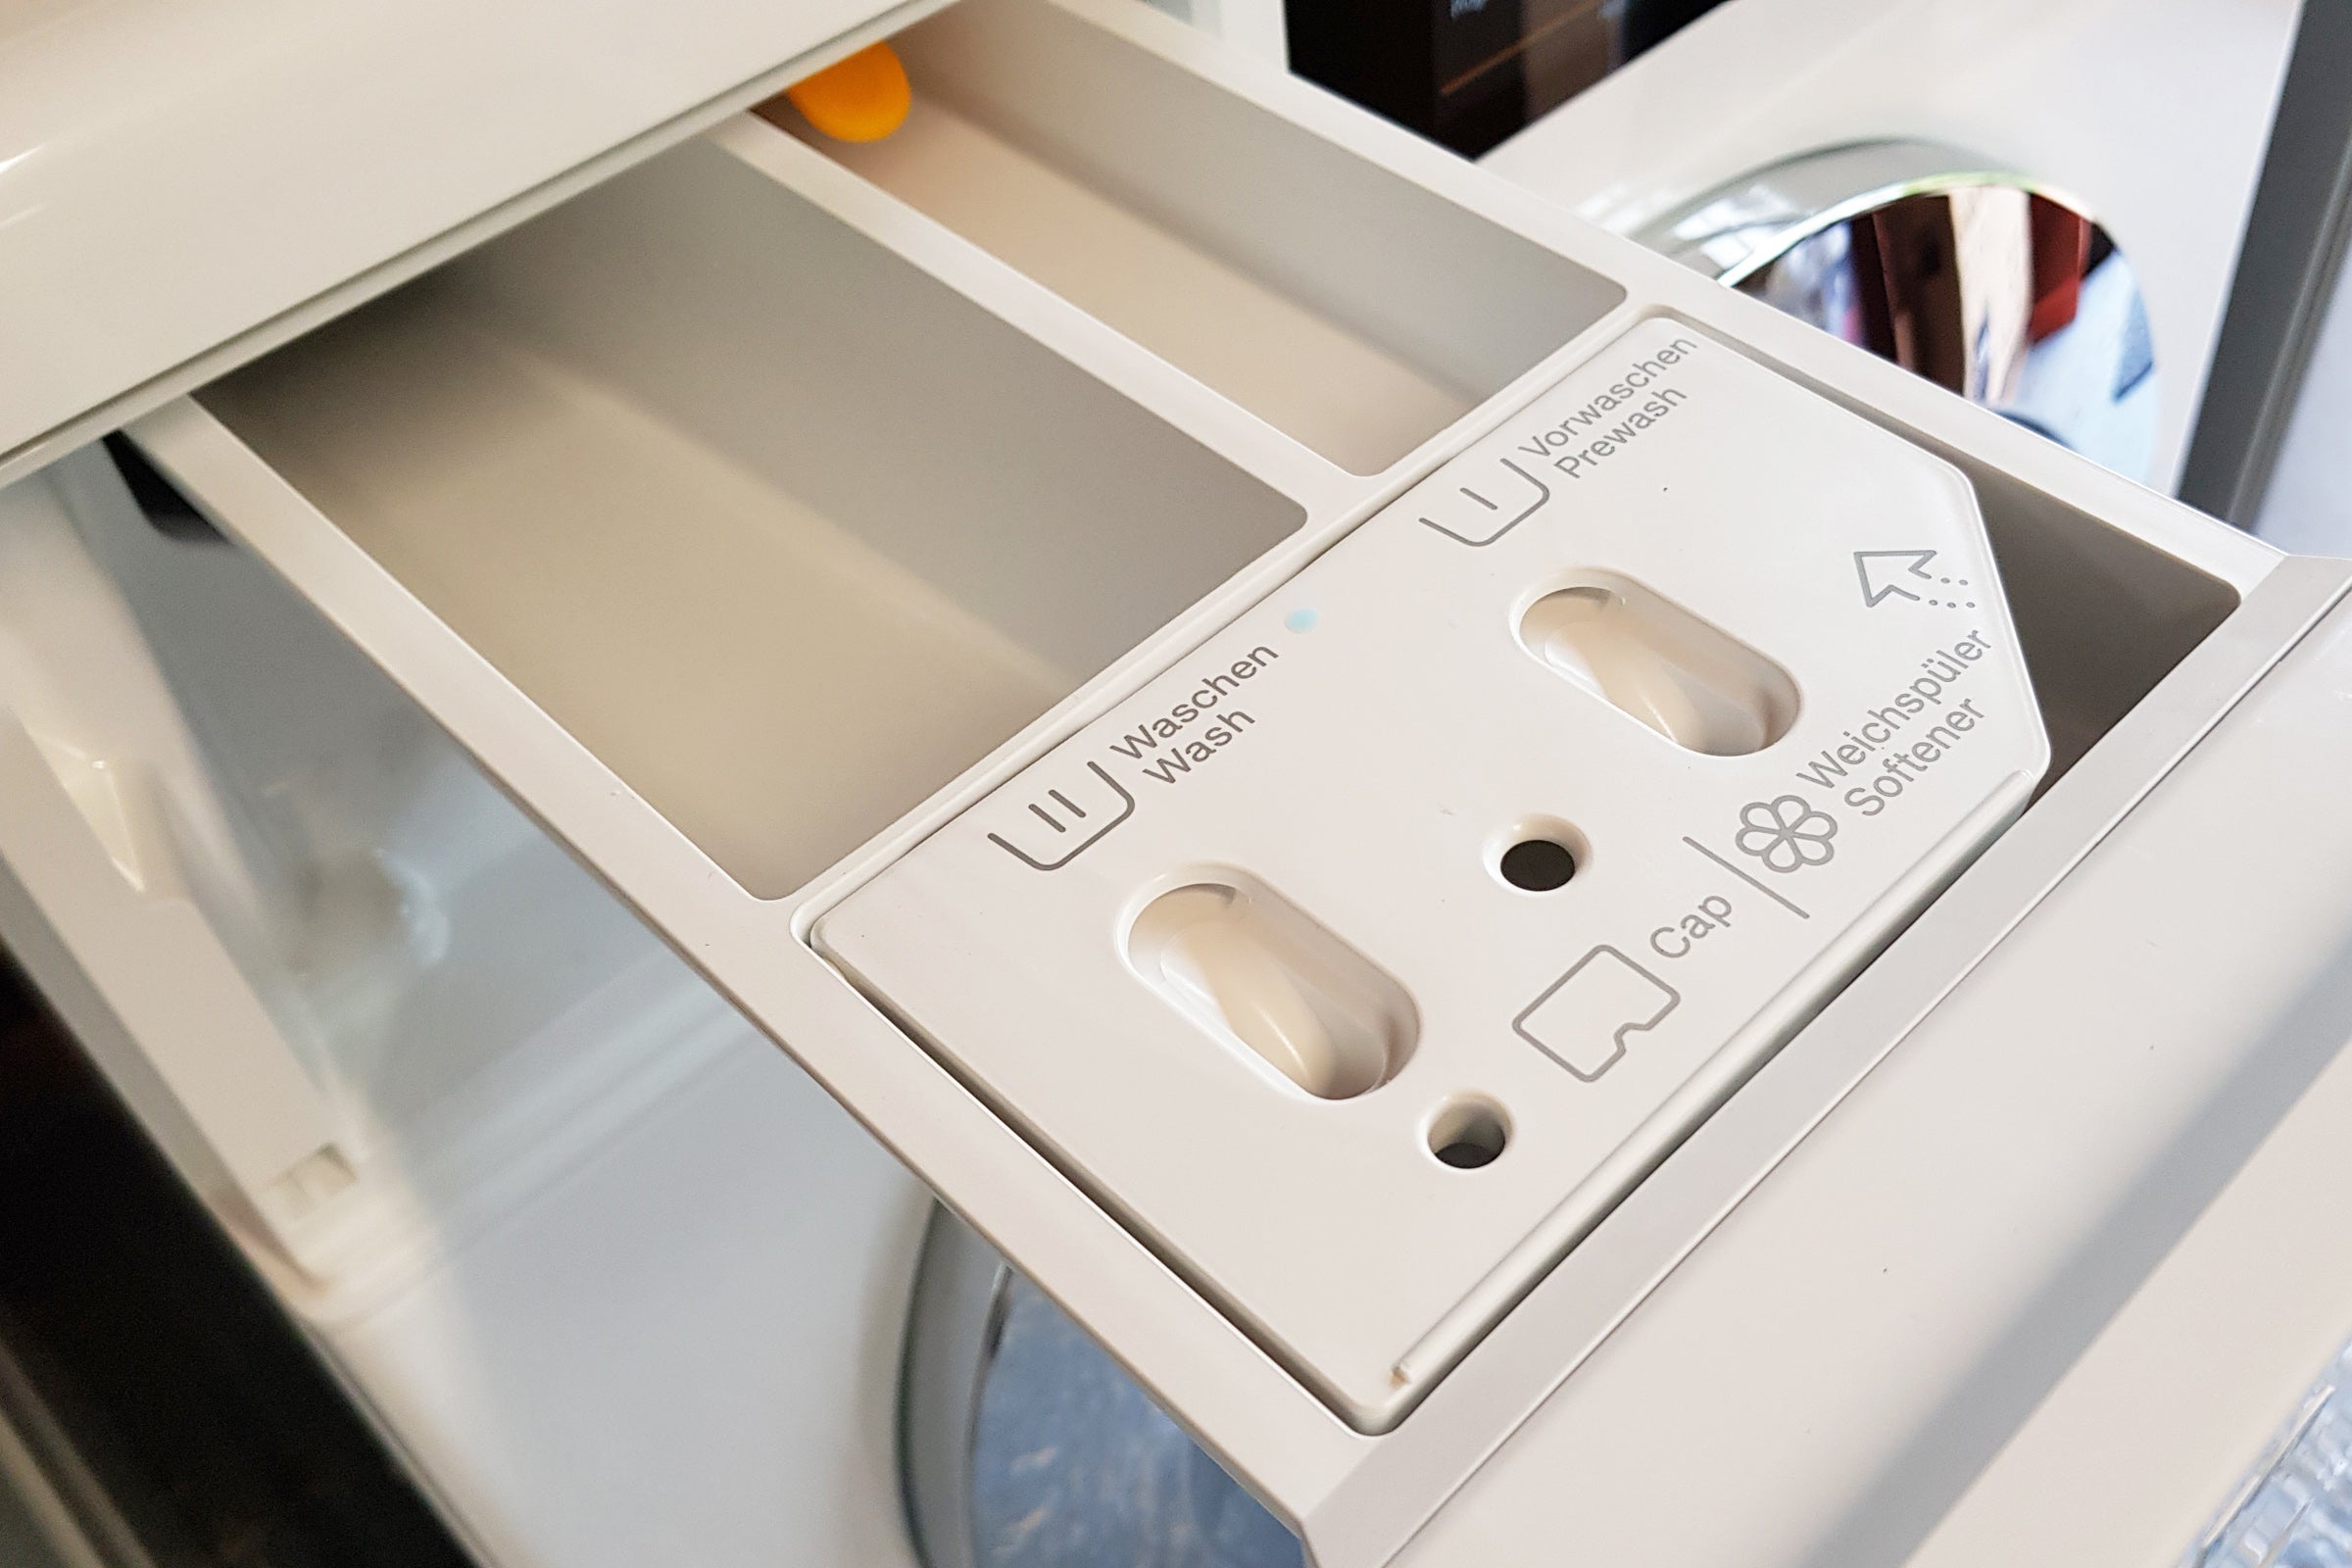 Miele Wcr860 Washing Machine Review | Trusted Reviews